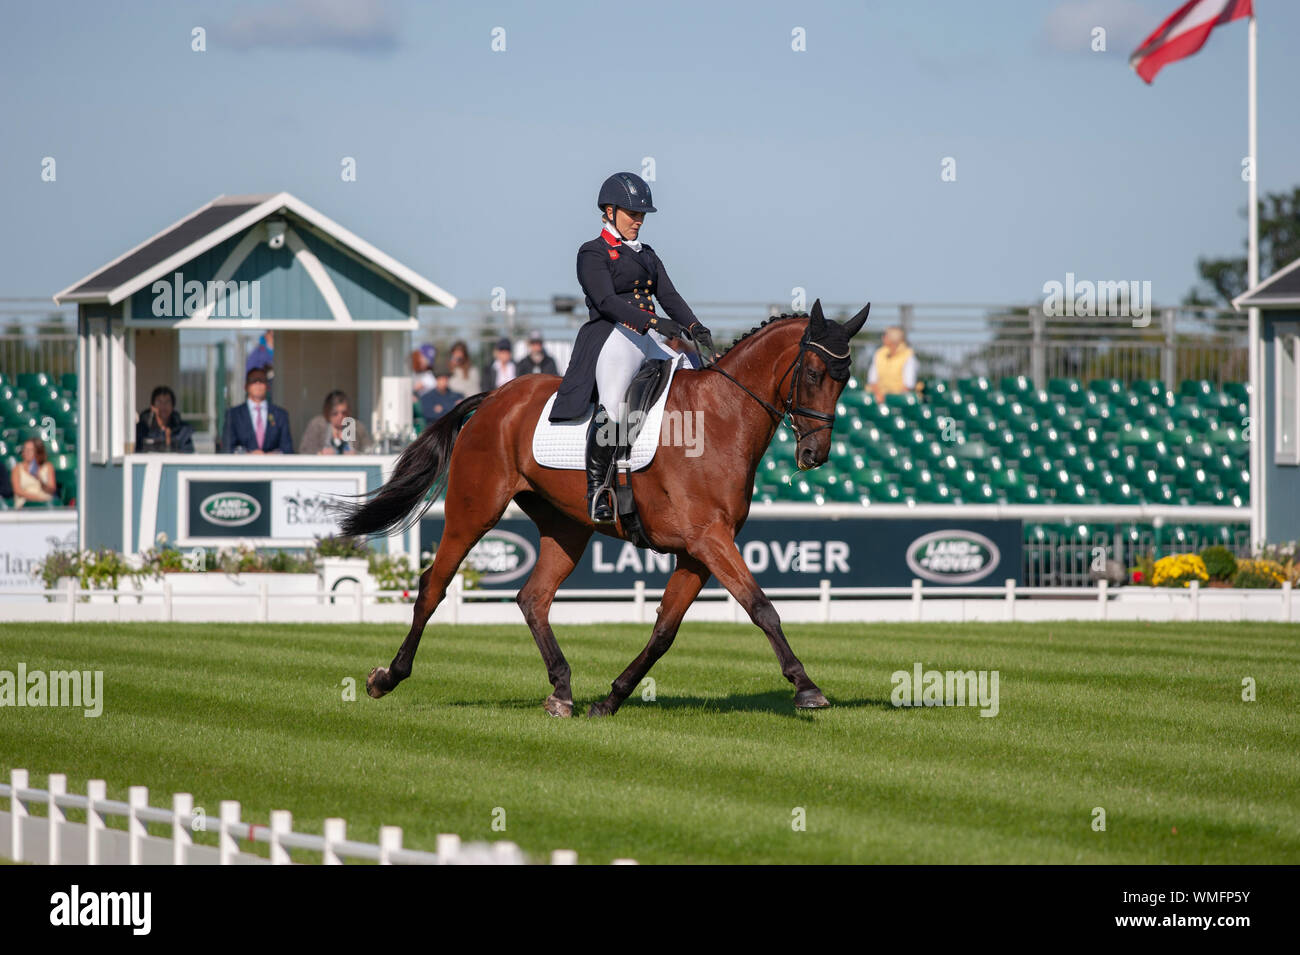 Stamford, Lincolnshire, United Kingdom, 5th September 2019, Gemma Tattersall (GB) & Arctic Soul during the Dressage Phase on Day 1 of the 2019 Land Rover Burghley Horse Trials, Credit: Jonathan Clarke/Alamy Live News Stock Photo